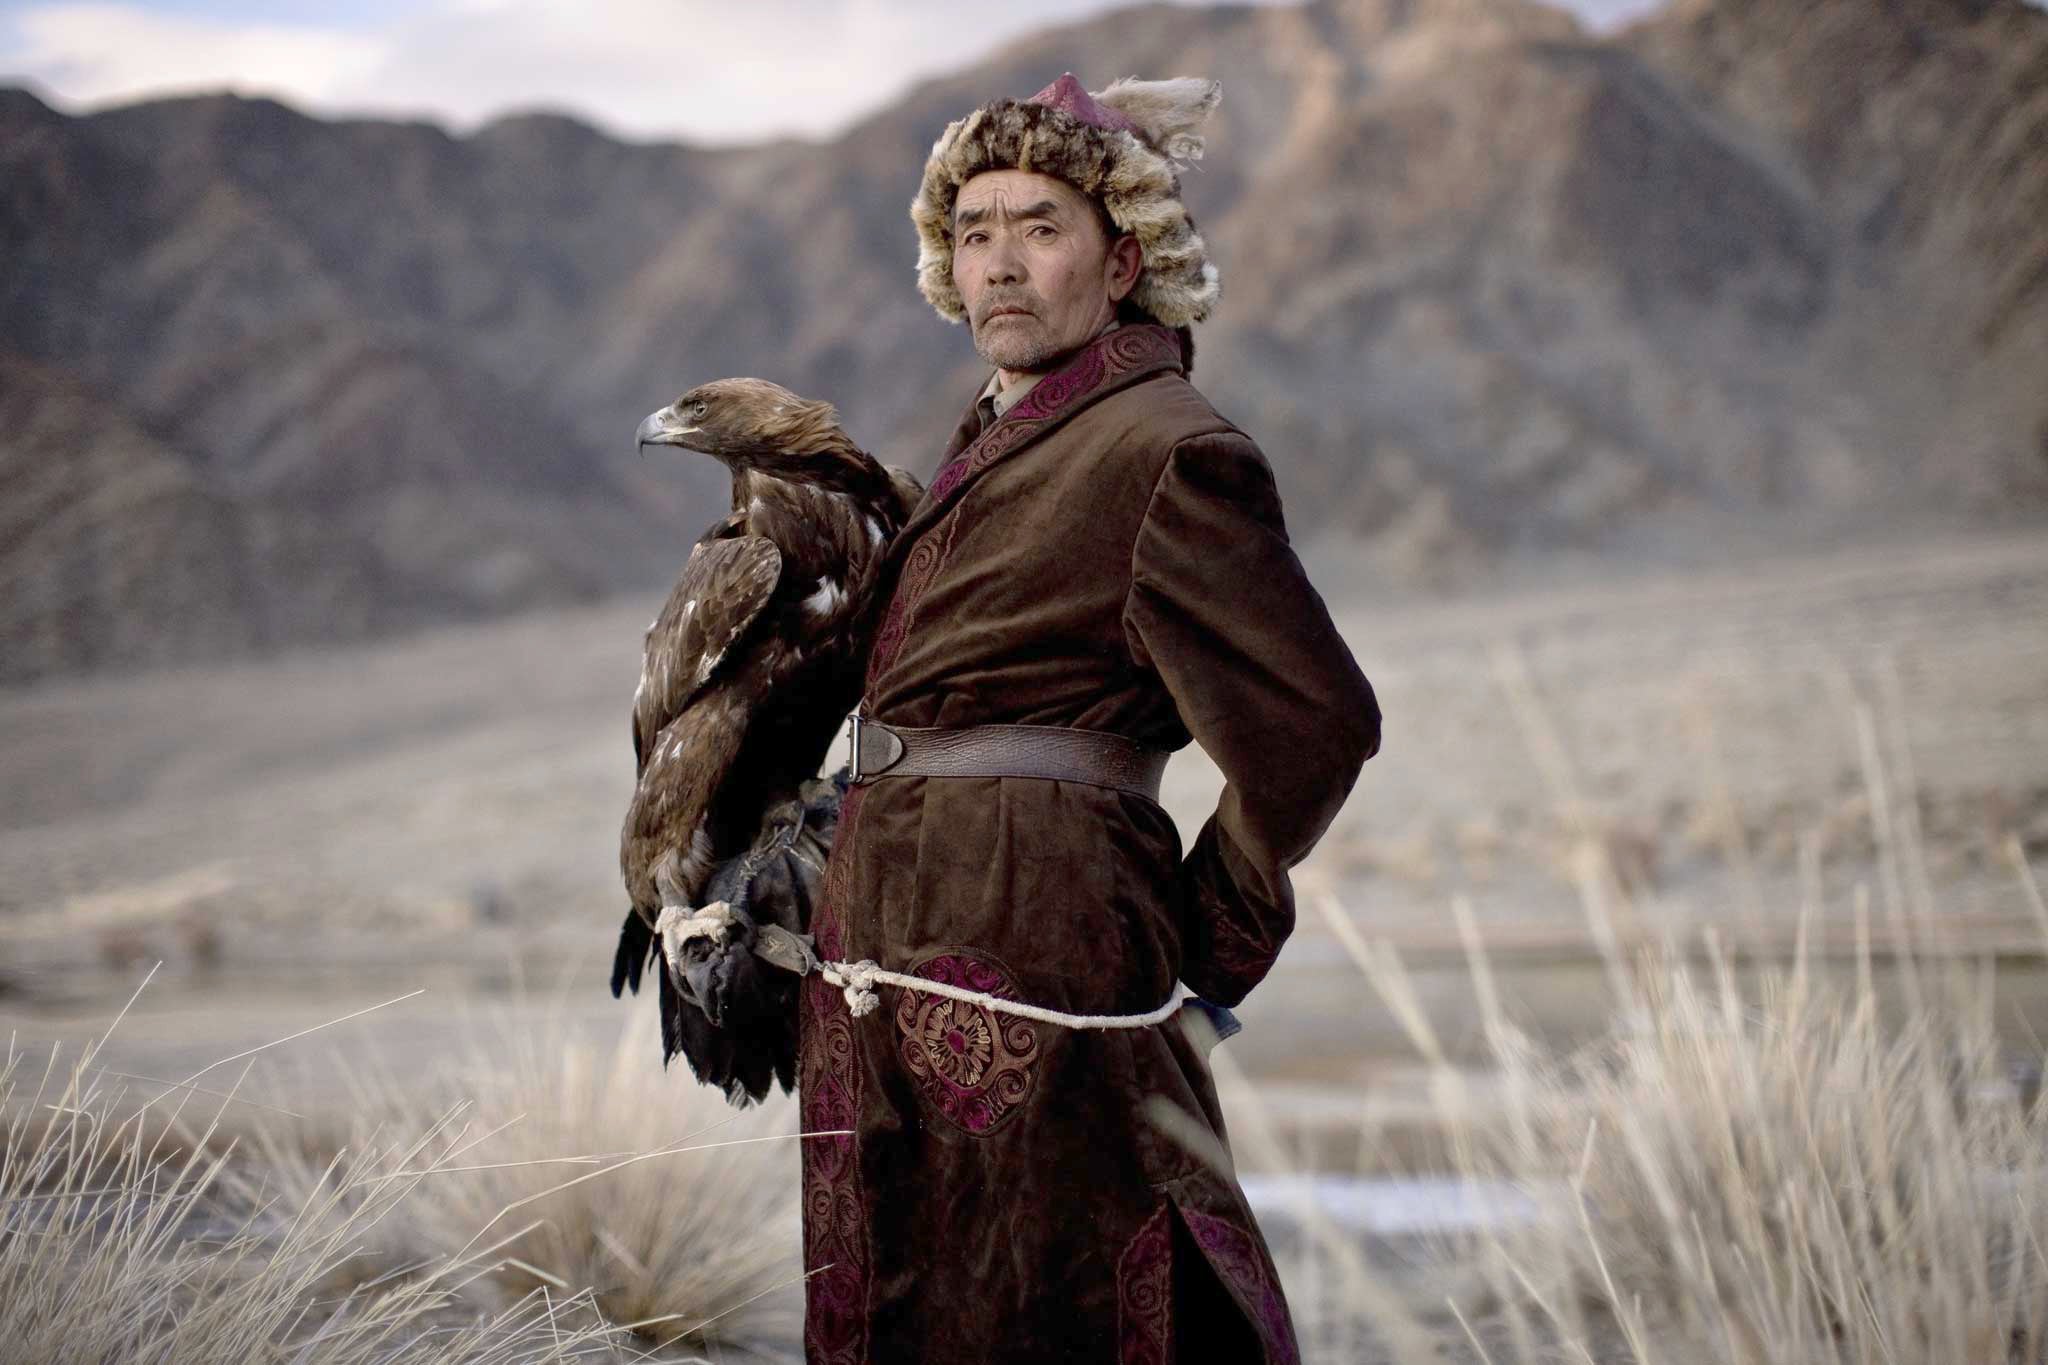 Wanders never cease: The nomadic life of Mongolia's Kazakh eagle-hunters | The Independent